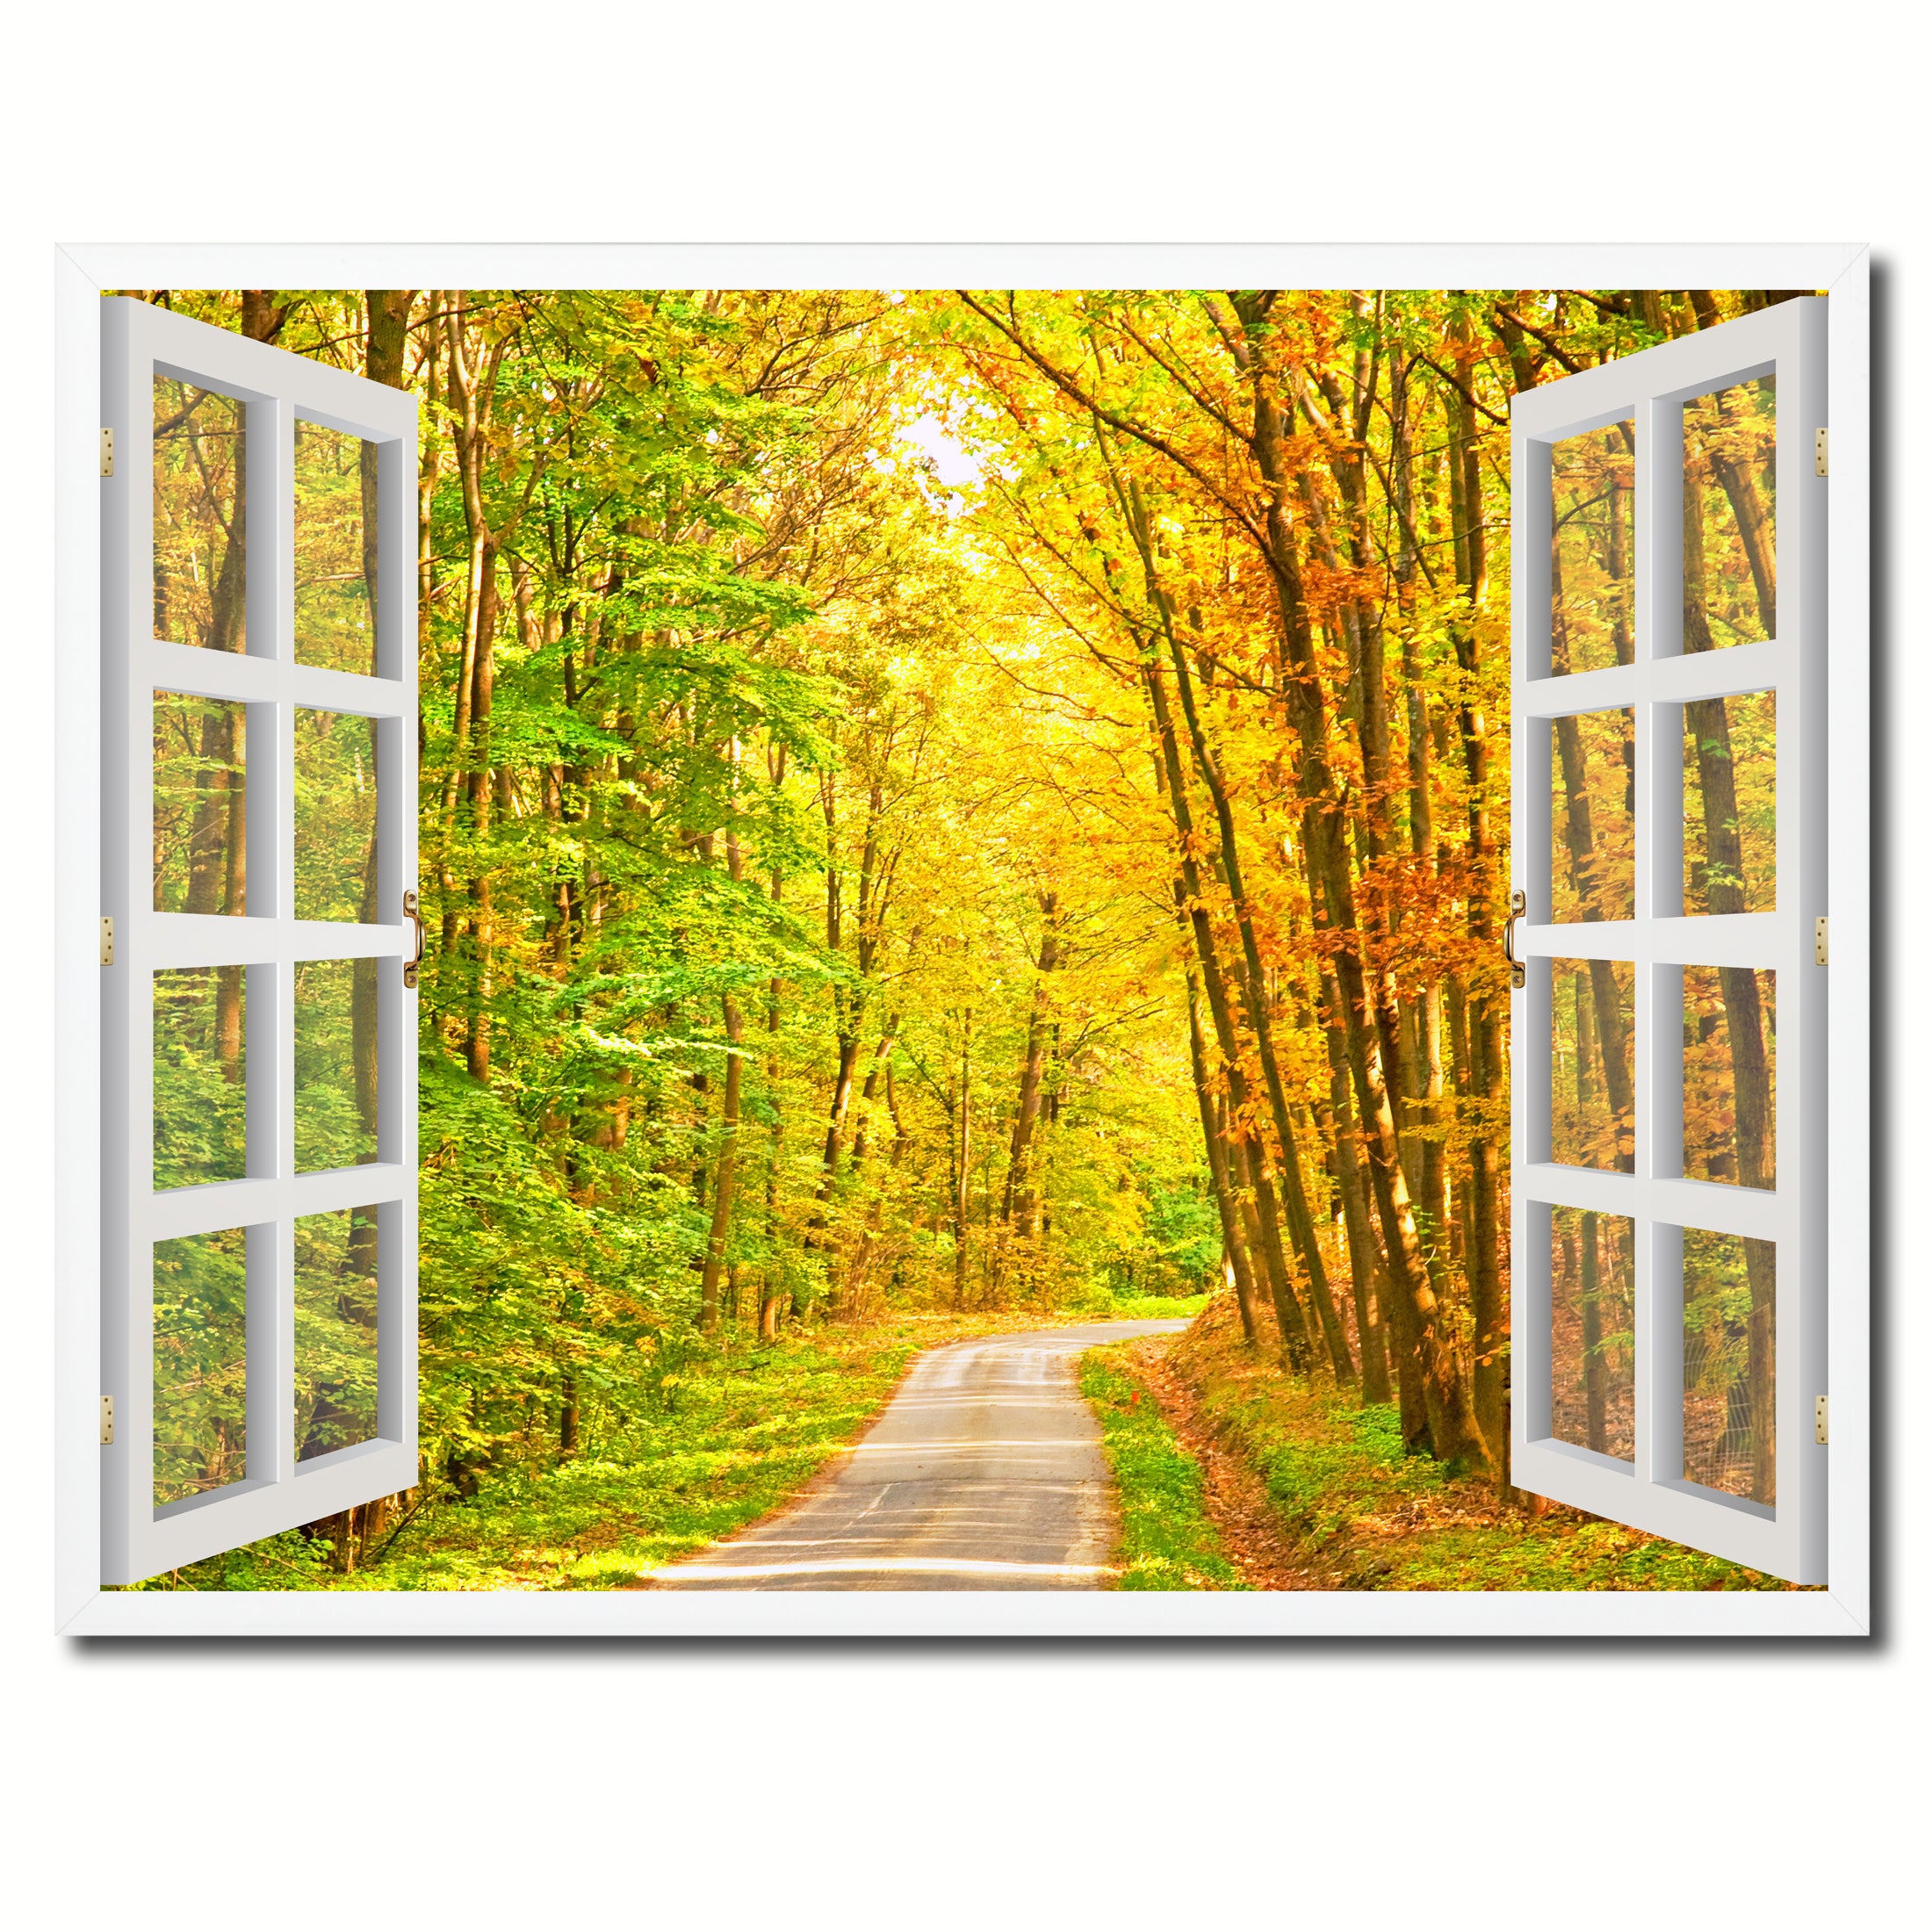 Pathway Autumn Park Fall Forest Picture French Window Framed Canvas Print Home Decor Wall Art Collection